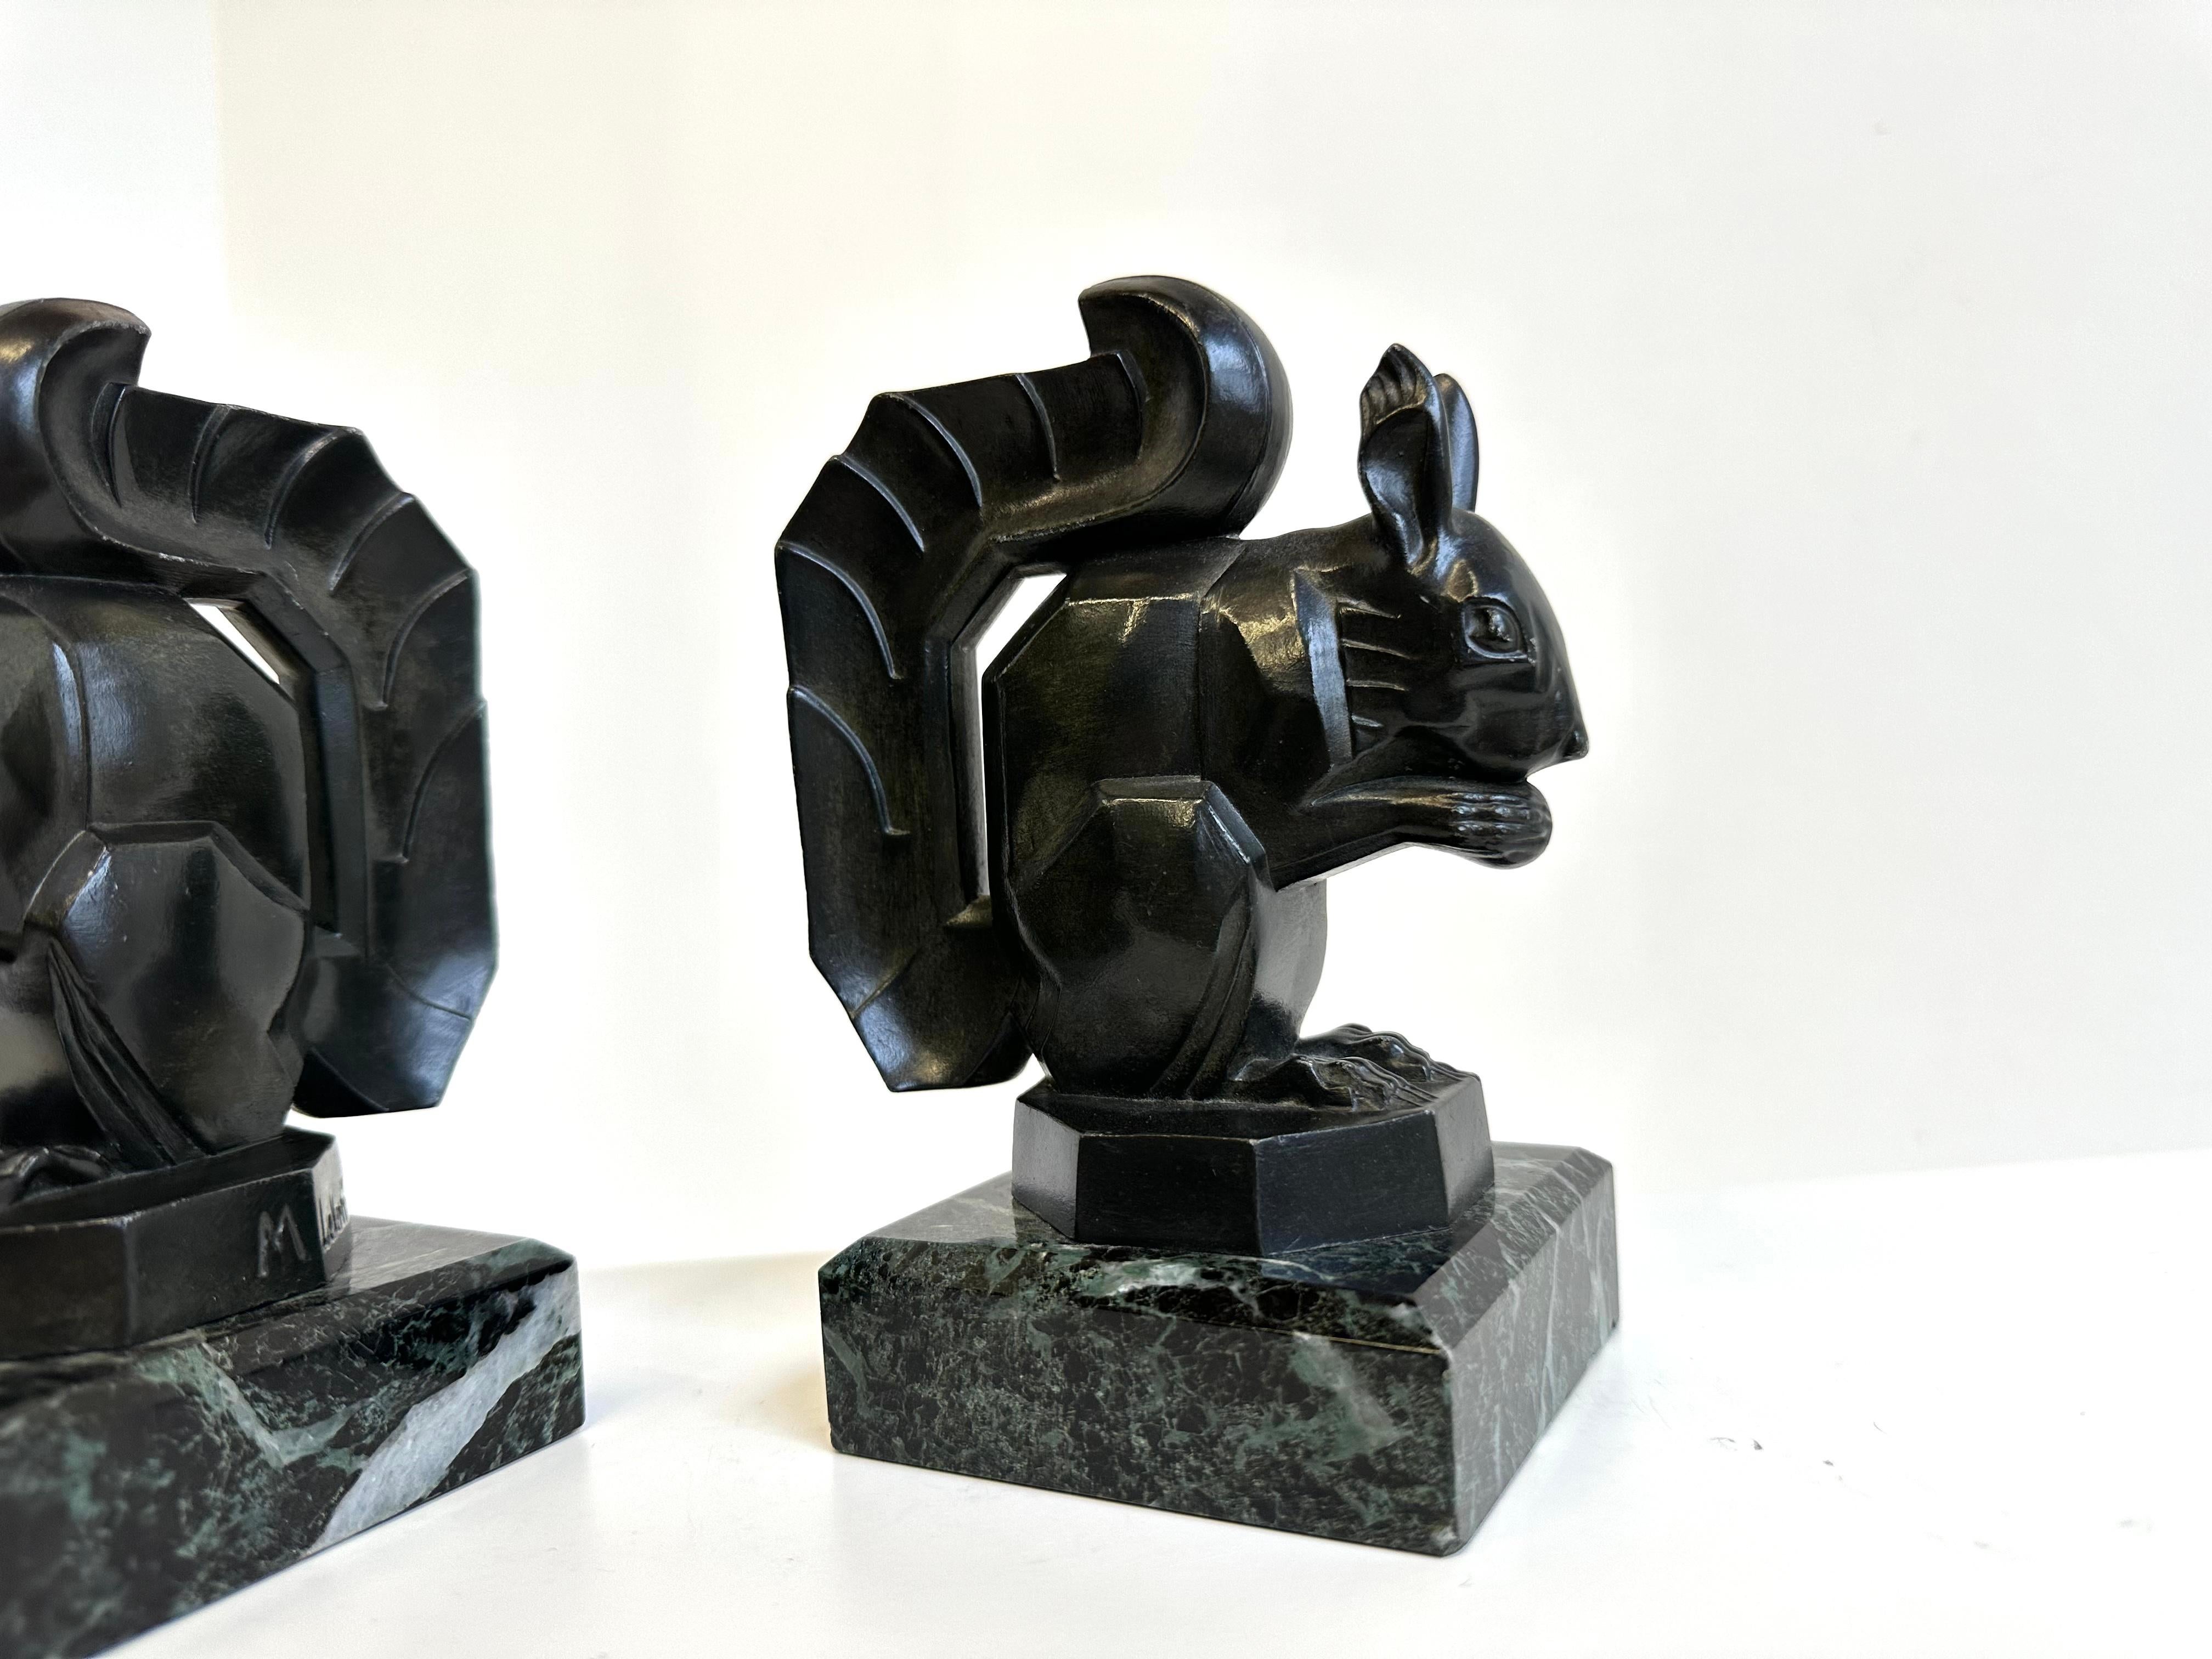 Antique Art Deco ''Squirrel'' Bookends by Max Le Verrier 1930 France Marble For Sale 2